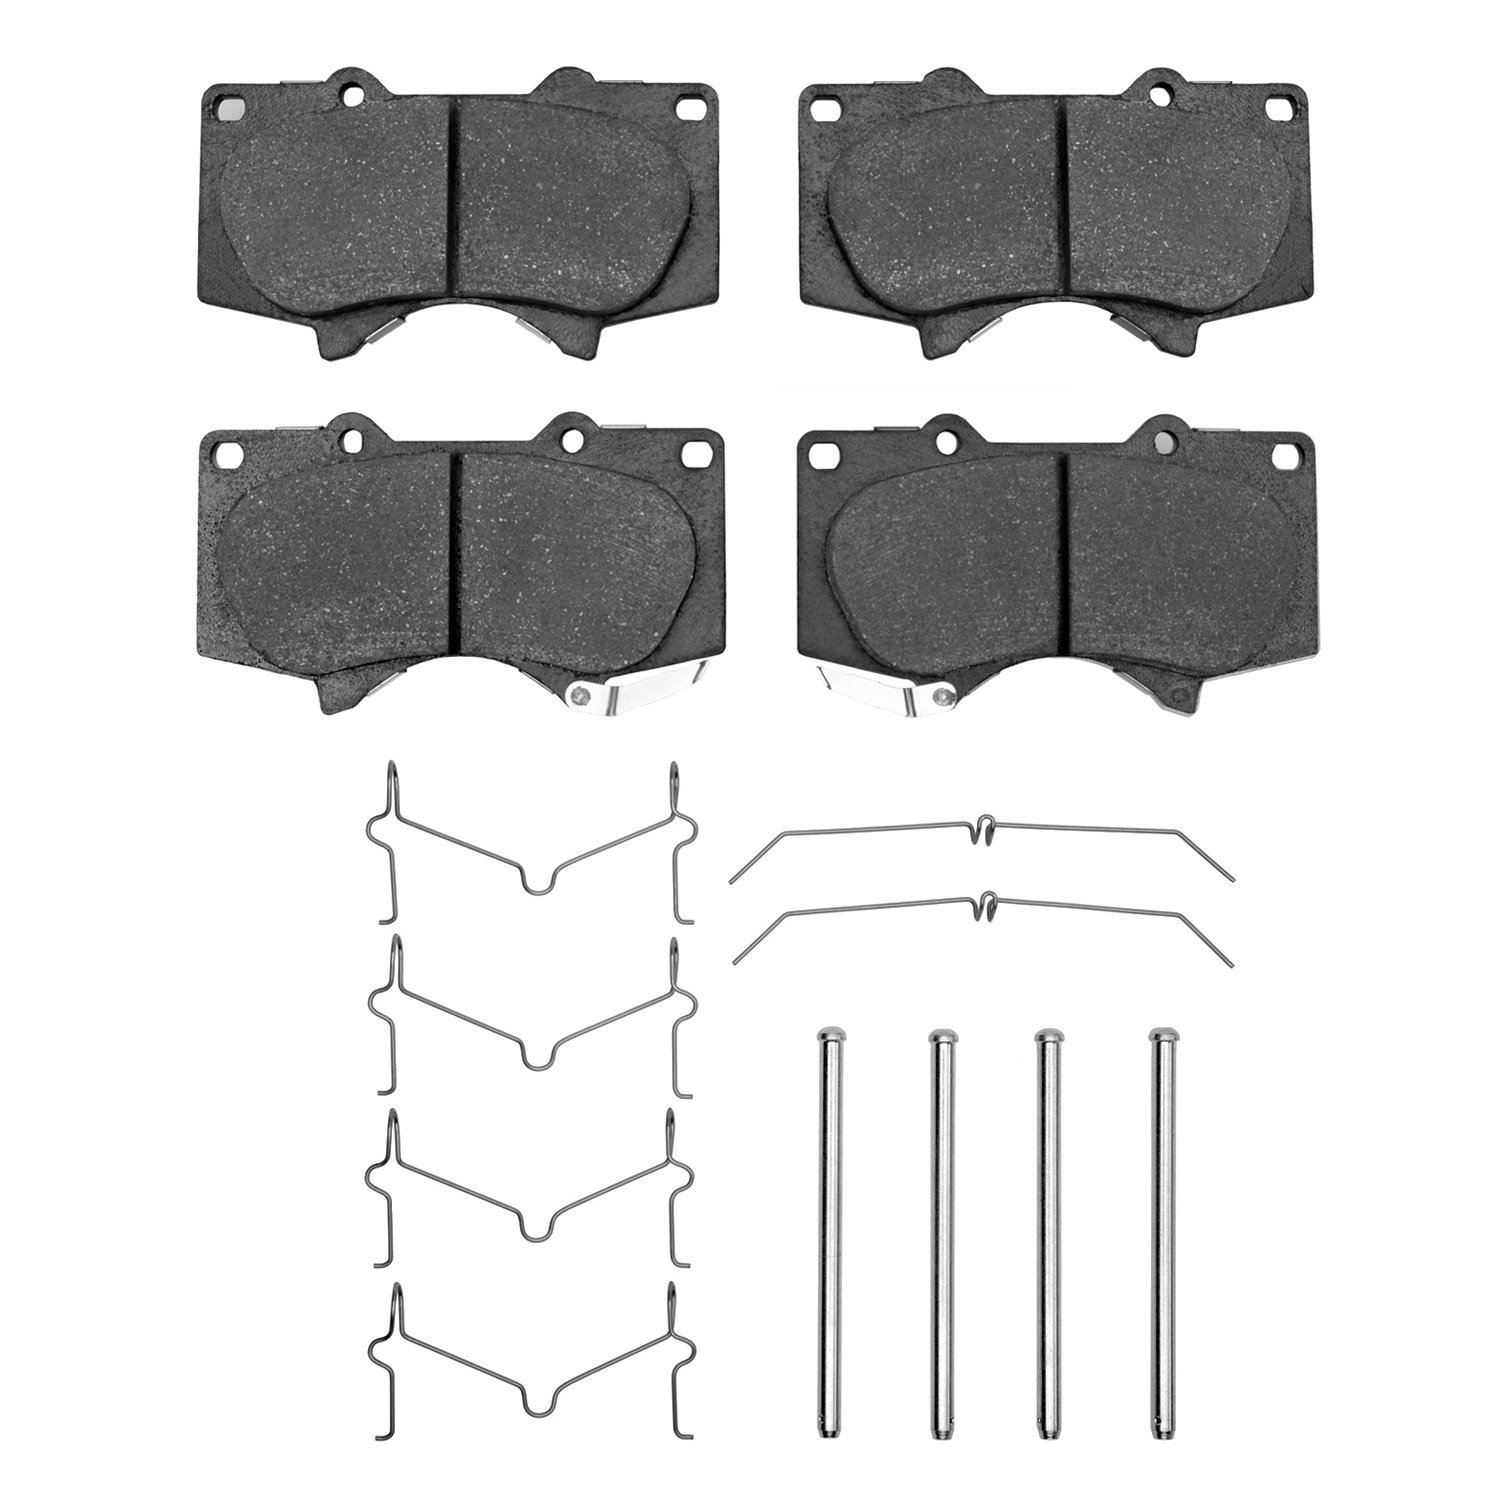 1400-0976-02 Ultimate-Duty Brake Pads & Hardware Kit, Fits Select Lexus/Toyota/Scion, Position: Front